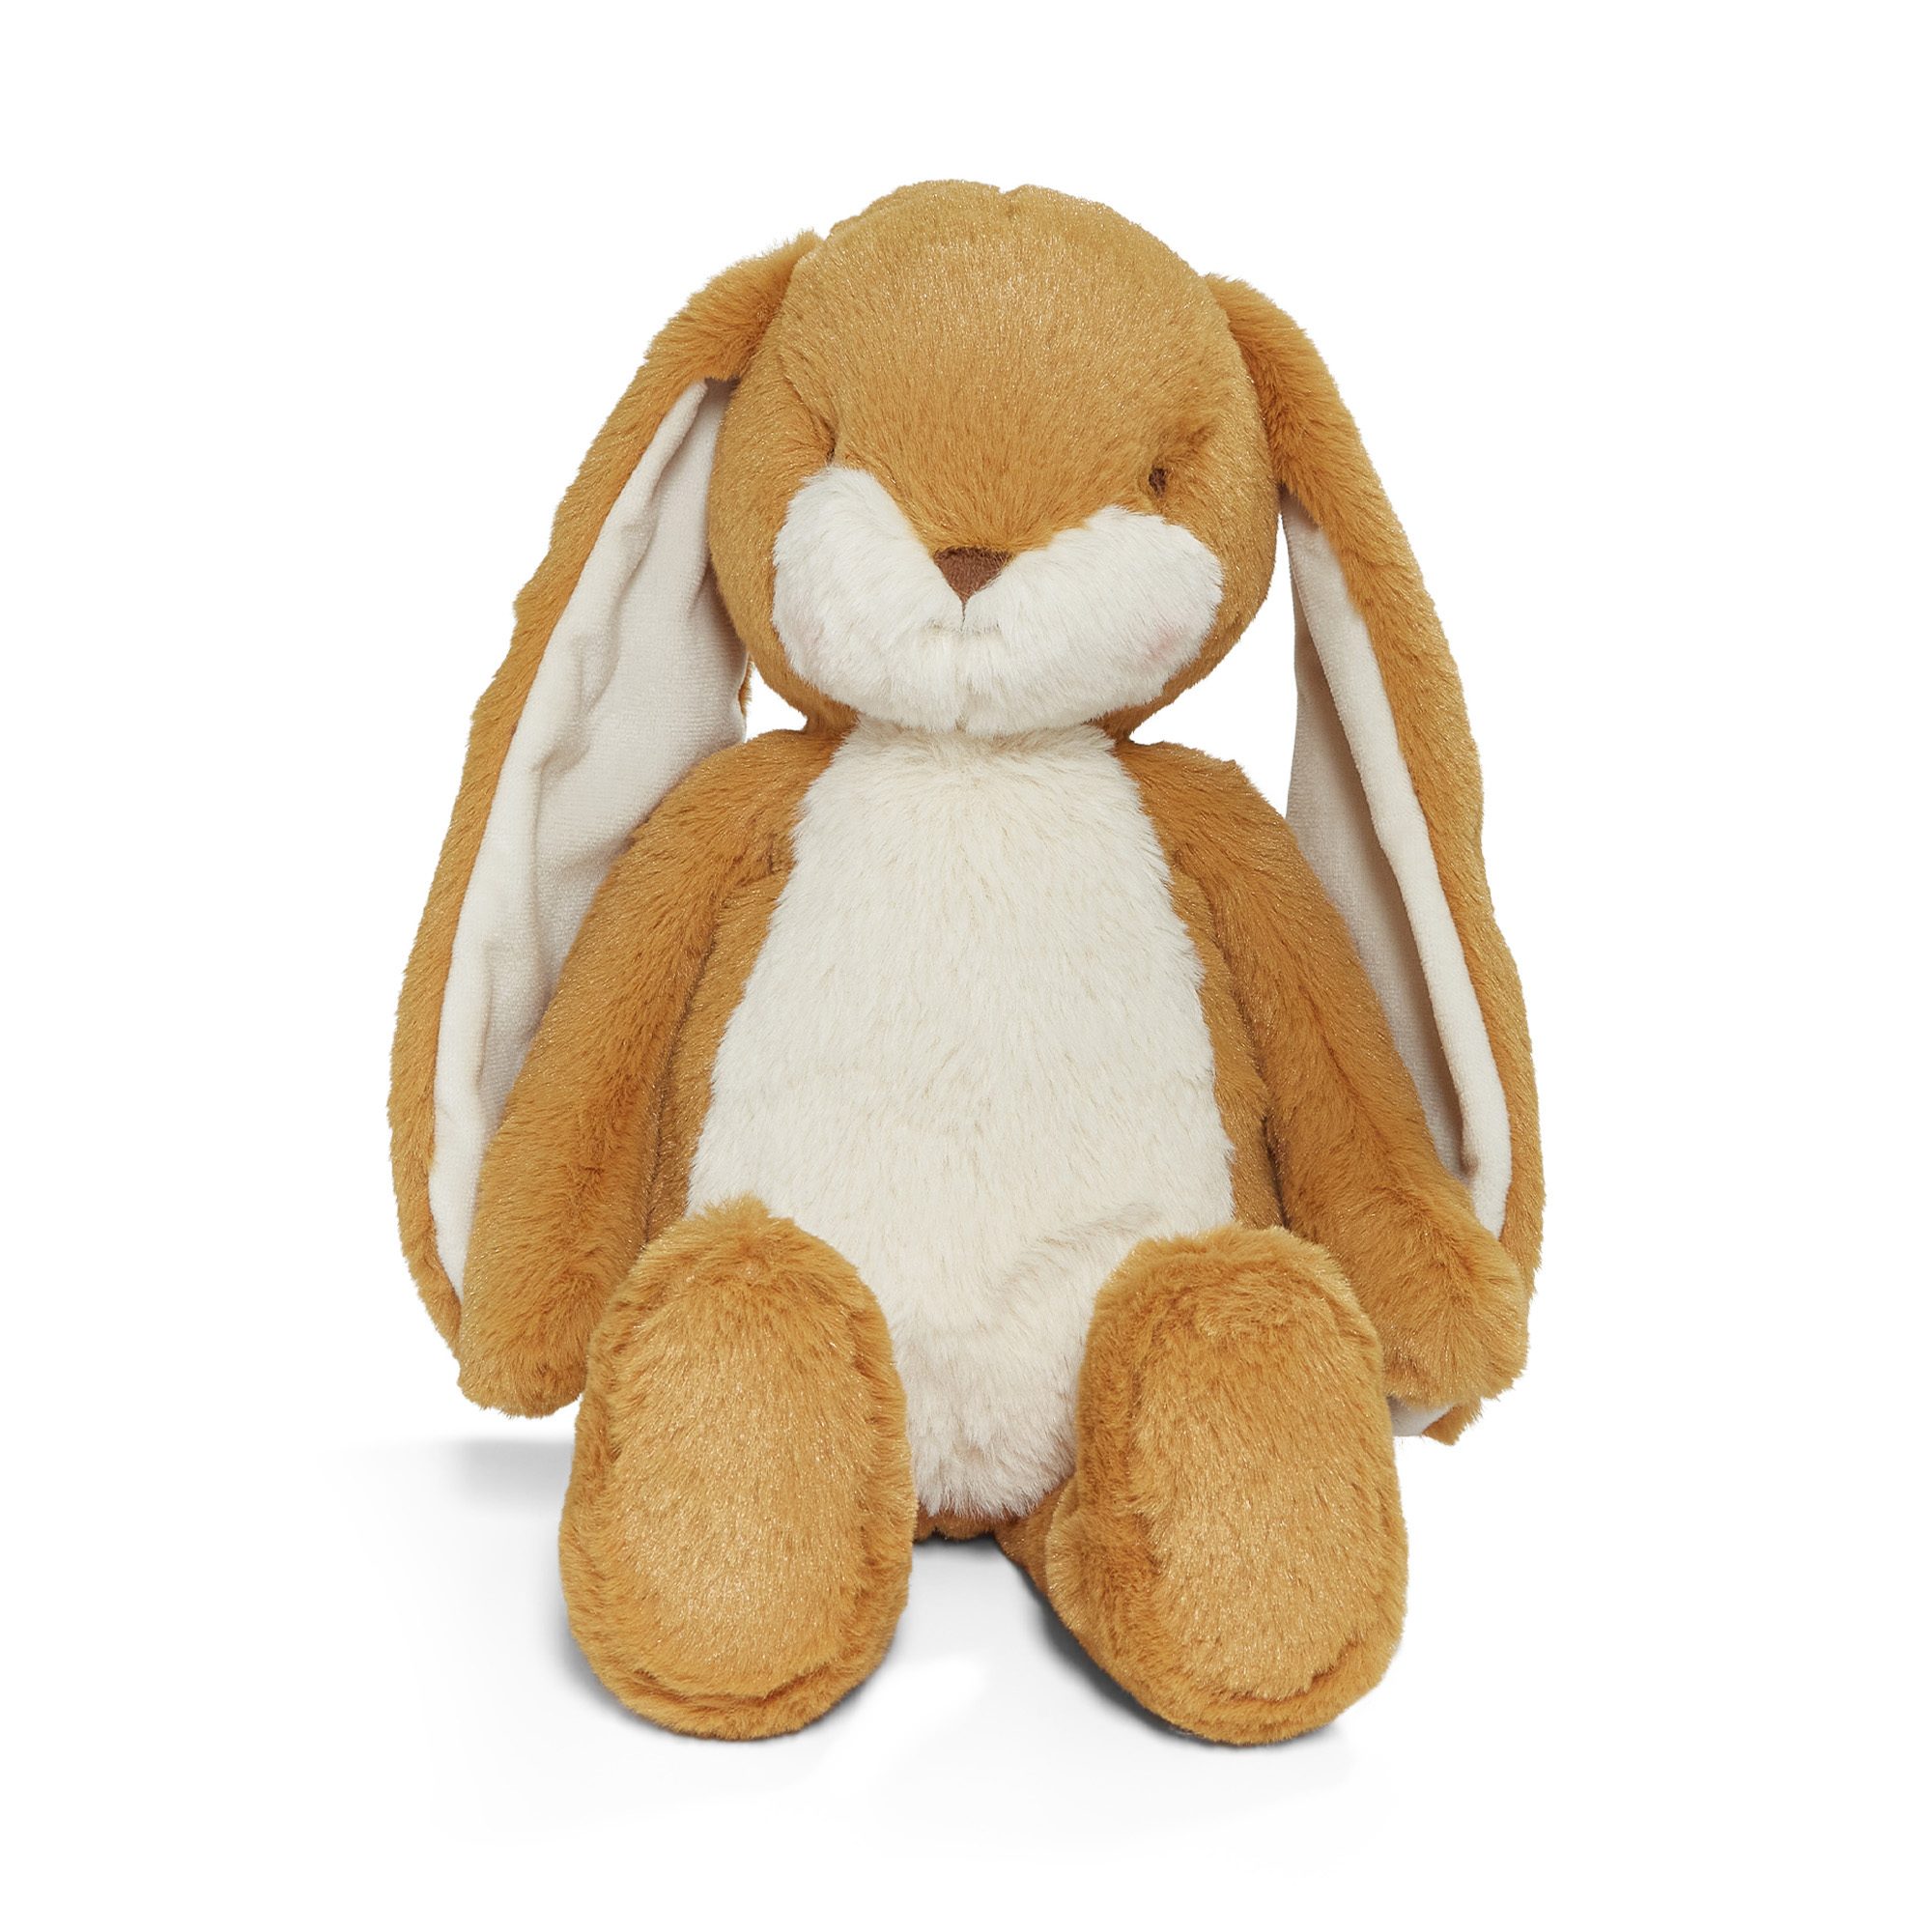 Peluche sweet nibble marygold 40cm - Bunnies By The Bay